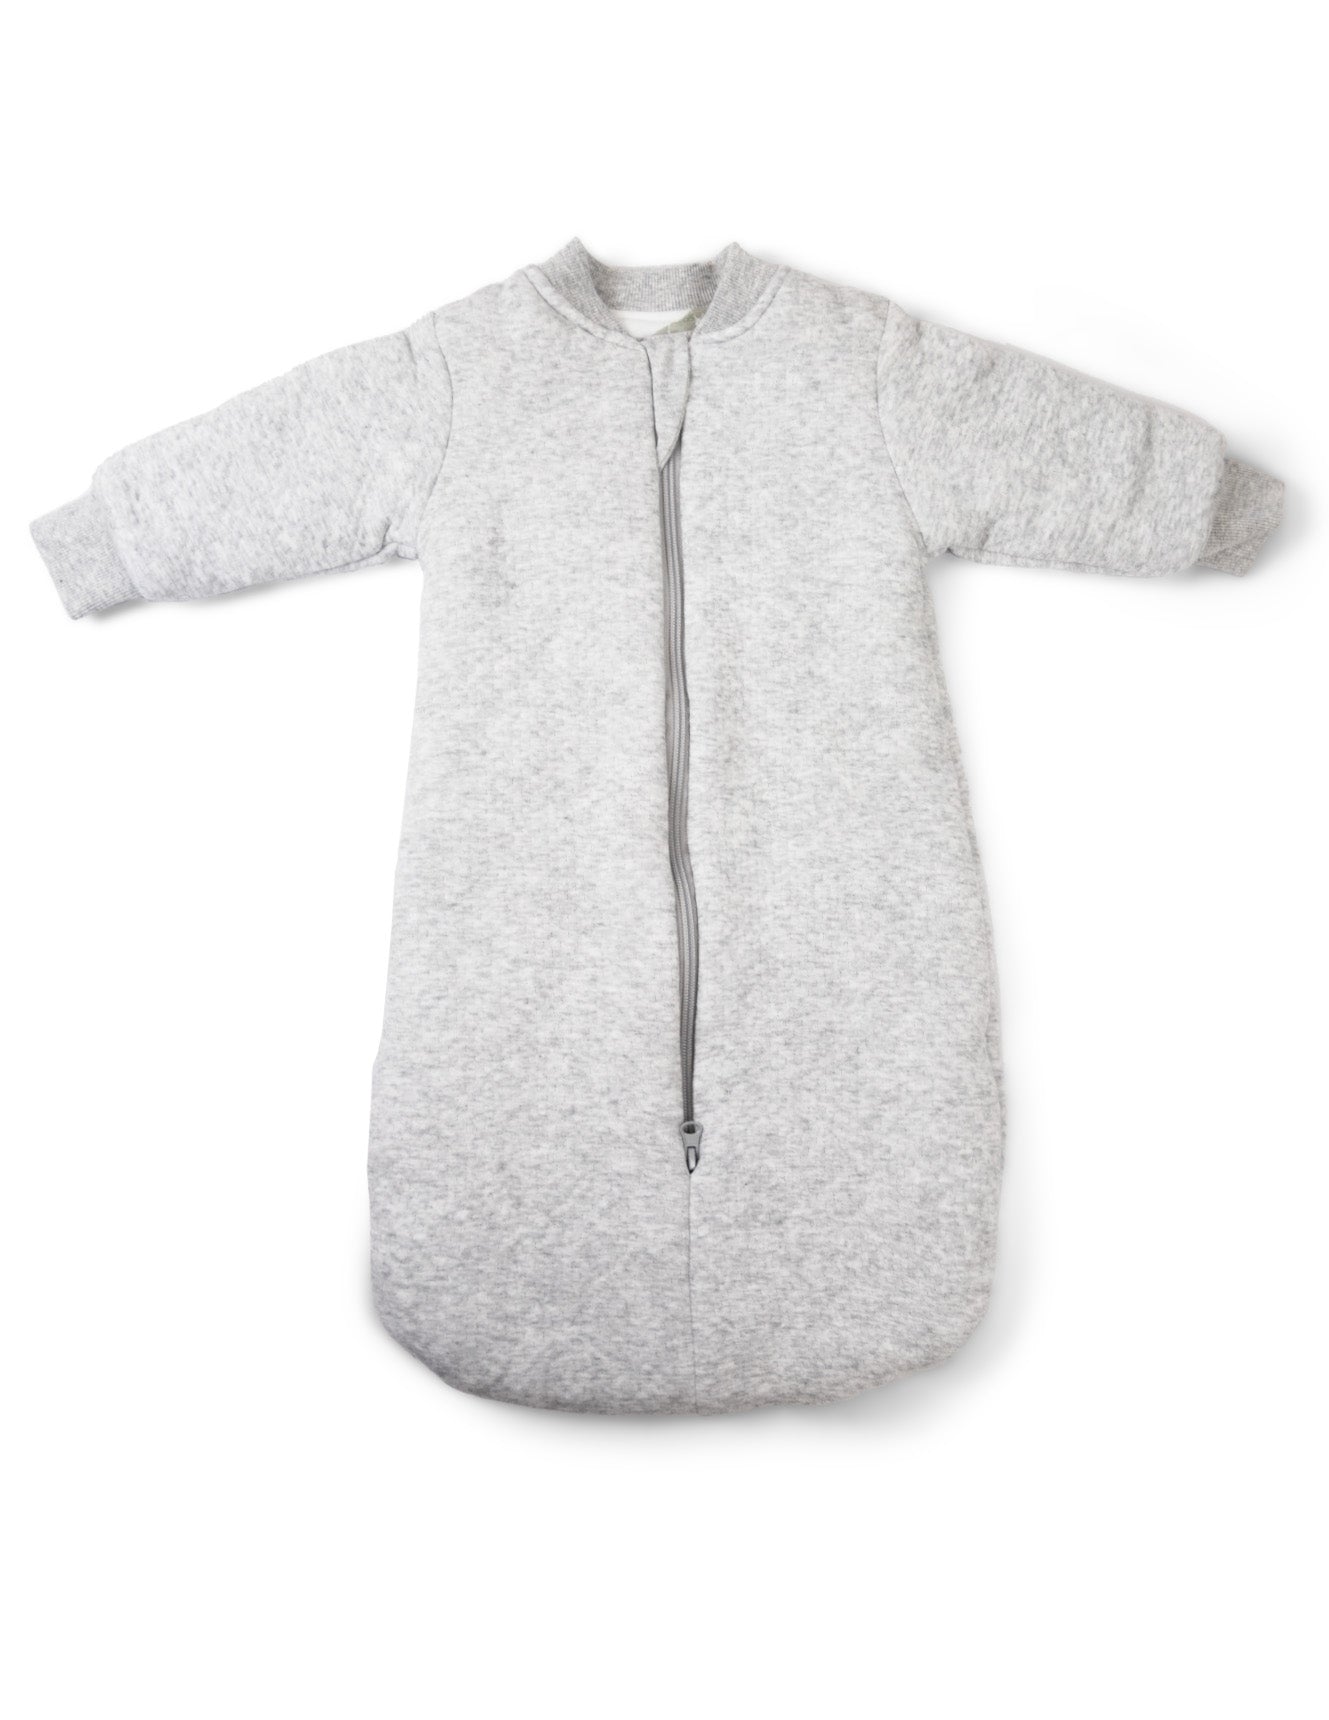 sleeping bag cotton with arms 3.0 TOG - grey marle/grey lines